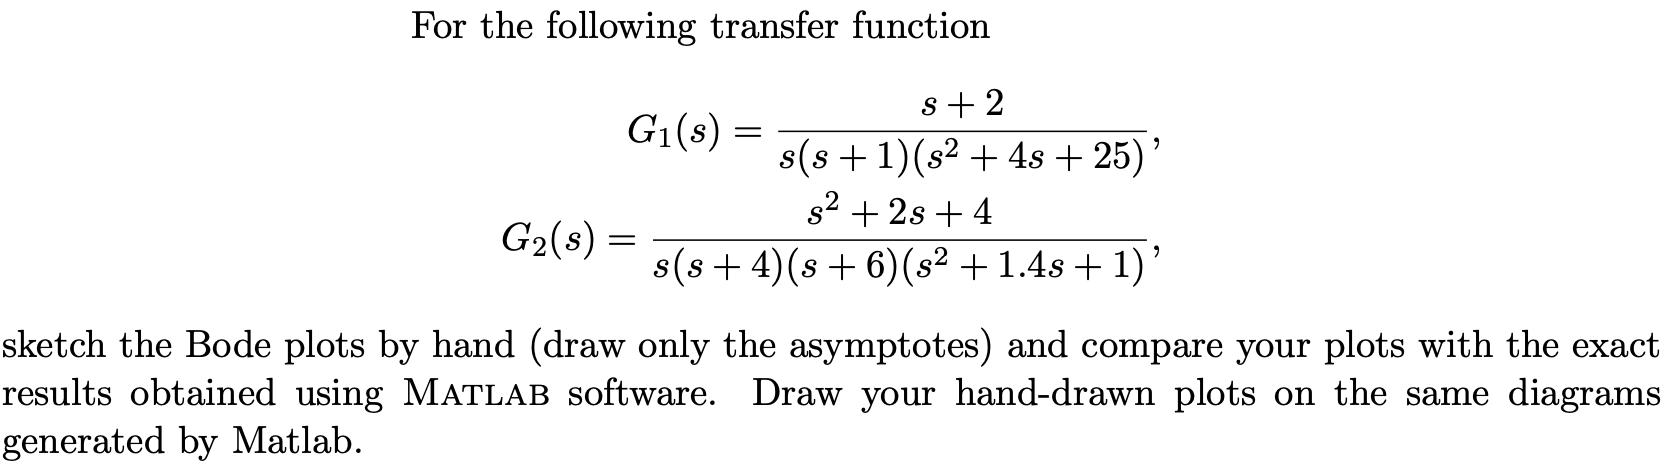 For the following transfer function G(s) s+2 s(s + 1)(s + 4s + 25)' s + 2s + 4 s(s+4) (s+6) (s + 1.4s + 1) '